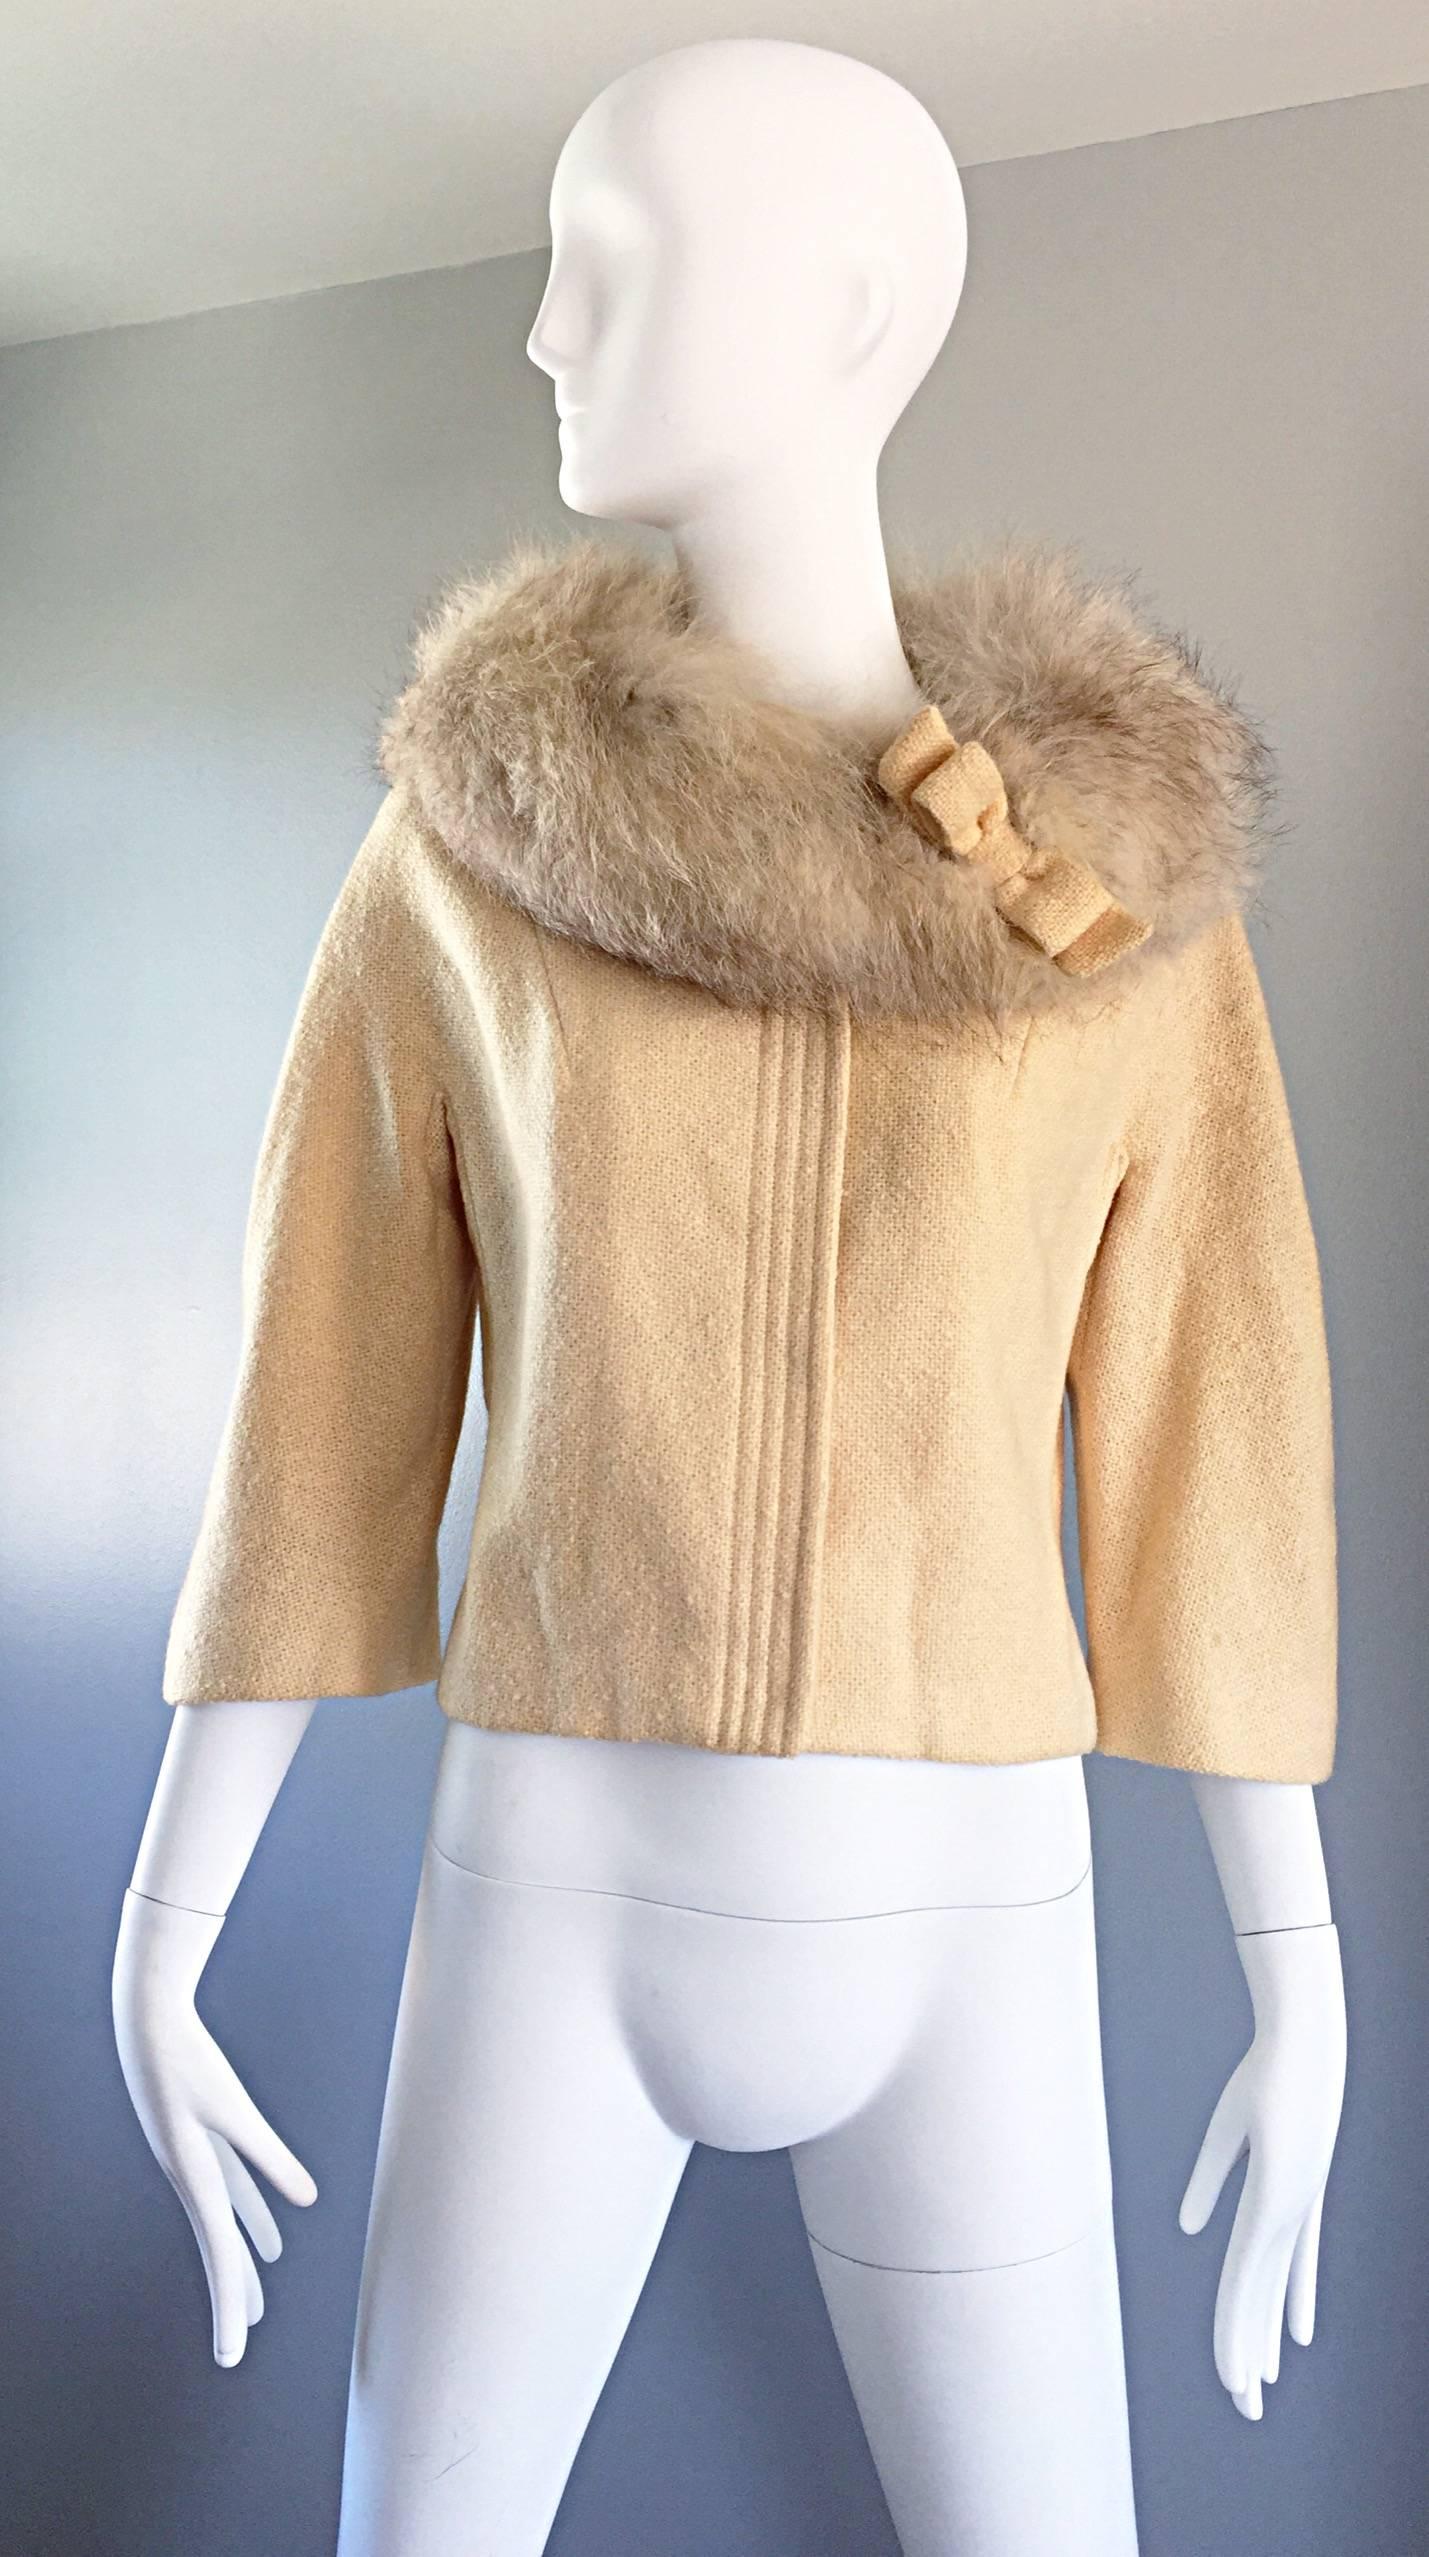 Adorable vintage 60s LILLI ANN ivory cropped swing jacket! Features an oversized fur (probably fox fur) collar with an ivory wool bow detail. Classic swing style flatters all shapes and sizes! Fully lined in silk. Hidden snaps up the bodice and at